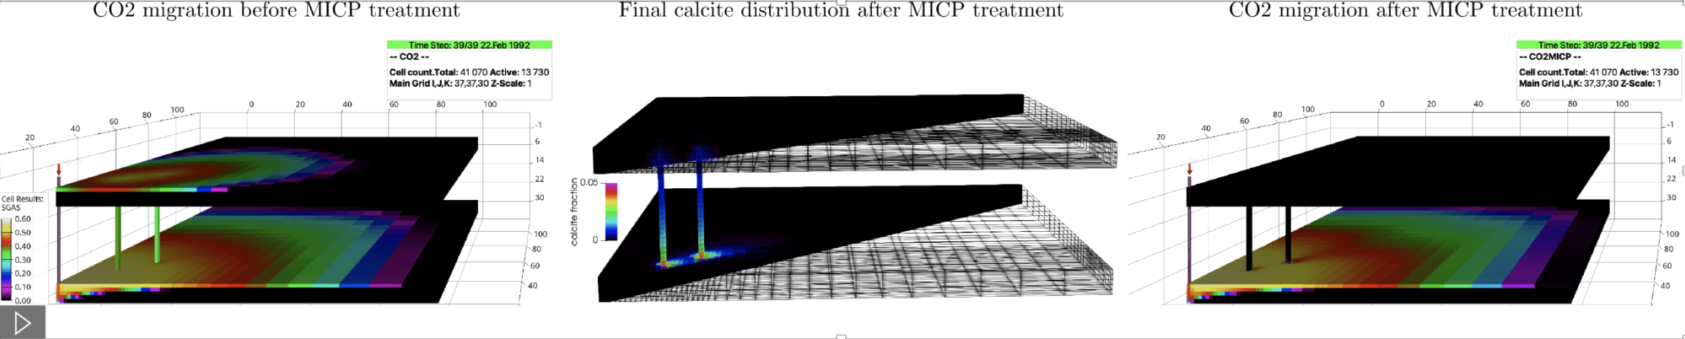 Landa Marban, Simulation results using OPM Flow of (left) CO2 injection prior to MICP treatment, (middle) calcite volume fraction after applying the optimized injection (bio-cement treatment) strategy, and (right) CO2 injection after MICP treatment., Screenshot 2022 03 30 at 12 03 43, , 